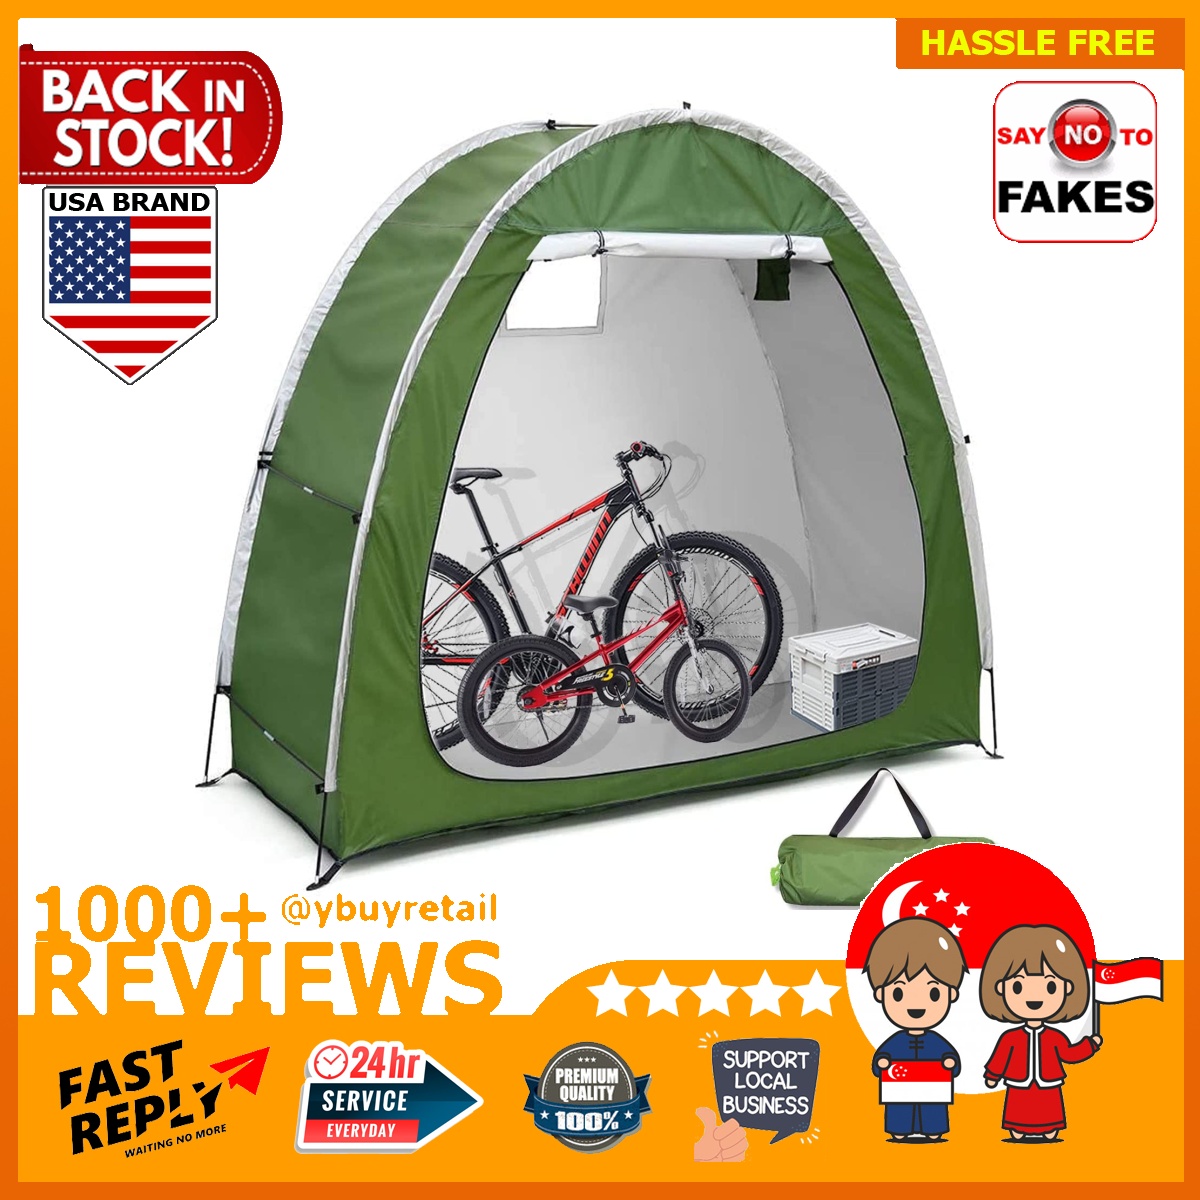 Outdoor Bike Storage Tent Bicycle Shed Cover for 2 Bikes 210d Silver Coated Oxford Cloth Waterproof Portable Tidy Foldable Bike Shelter for Camping Garden Tool Motorcycle（Green） Bike Tent 